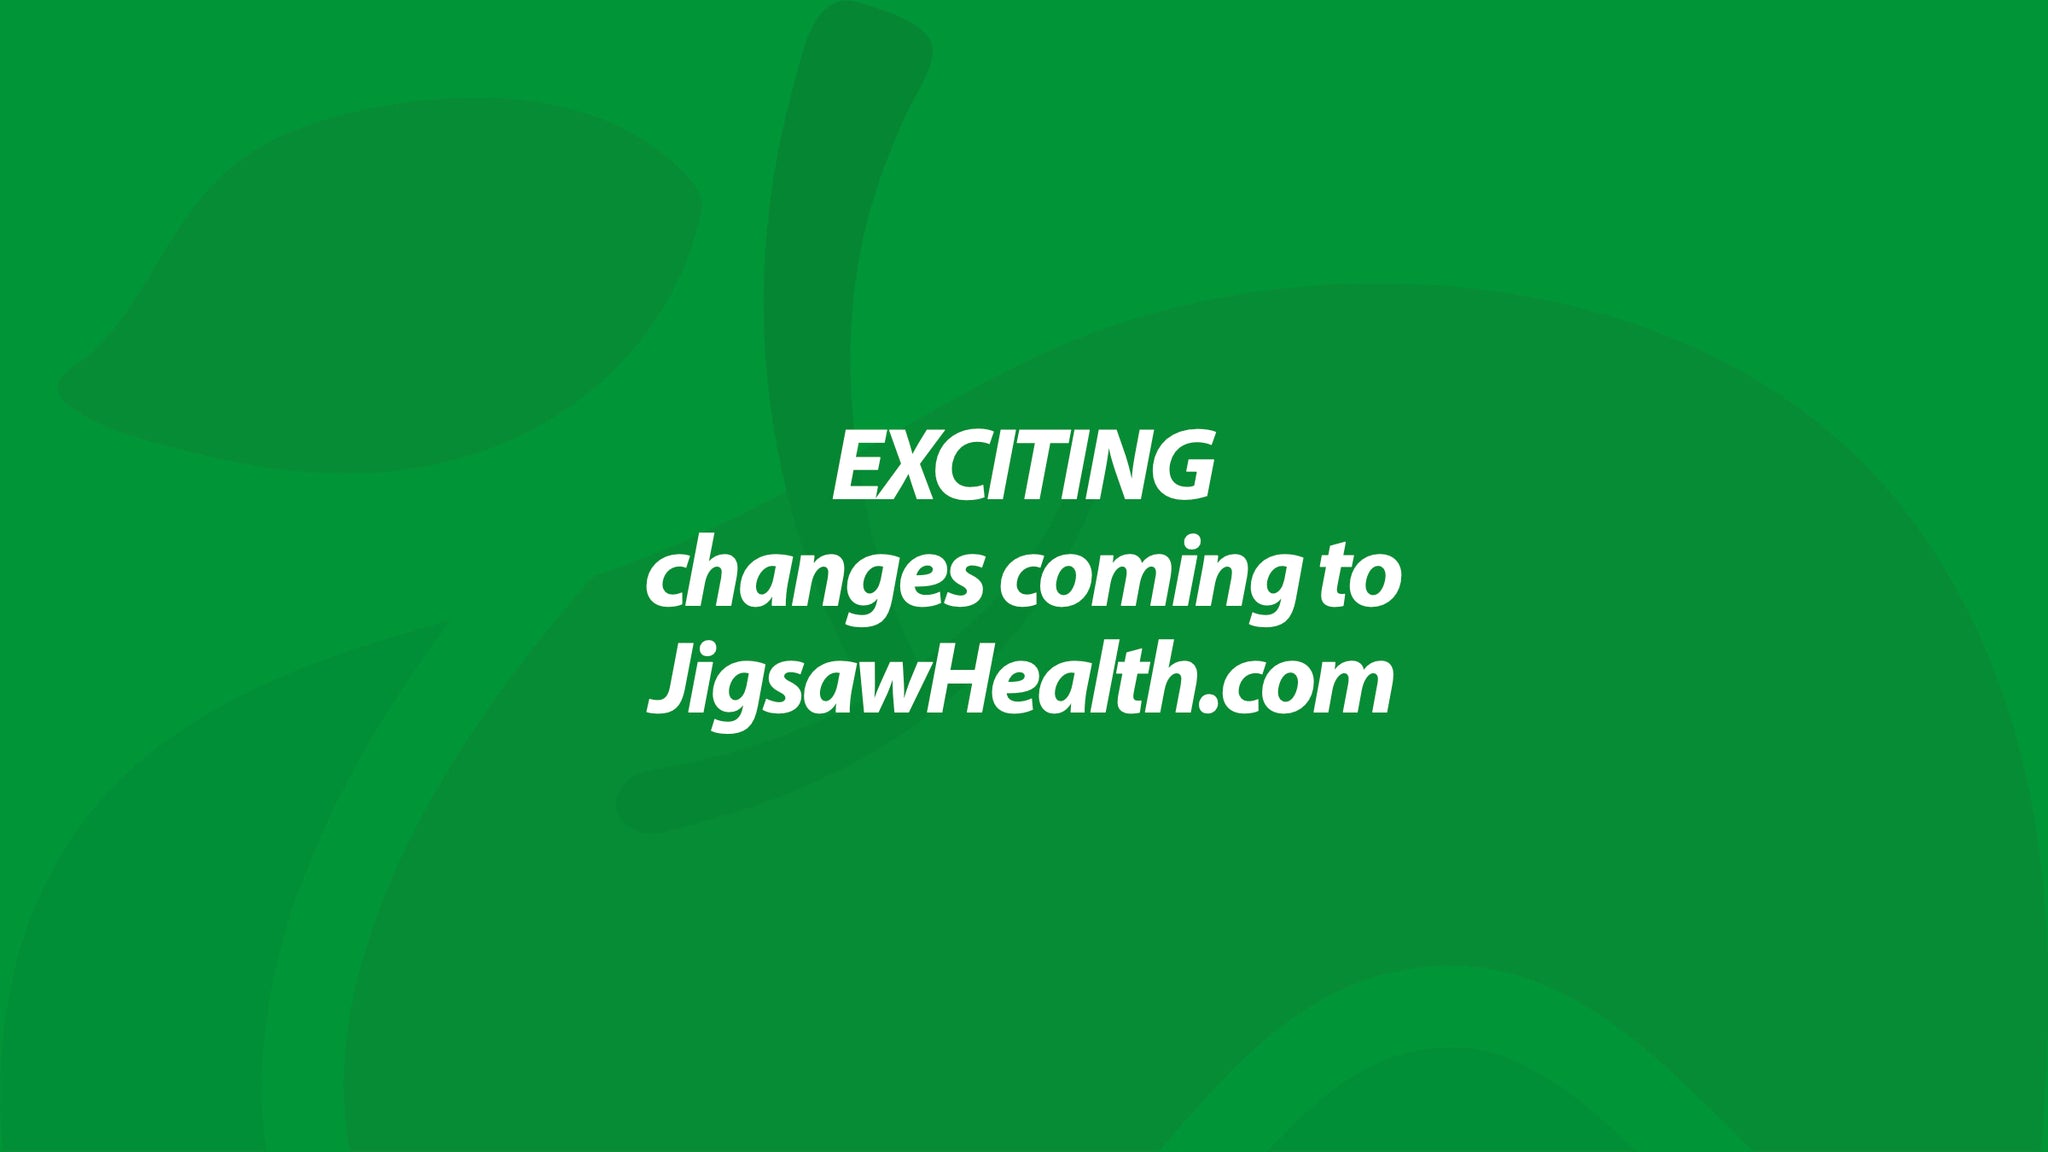 Exciting changes coming to JigsawHealth.com!